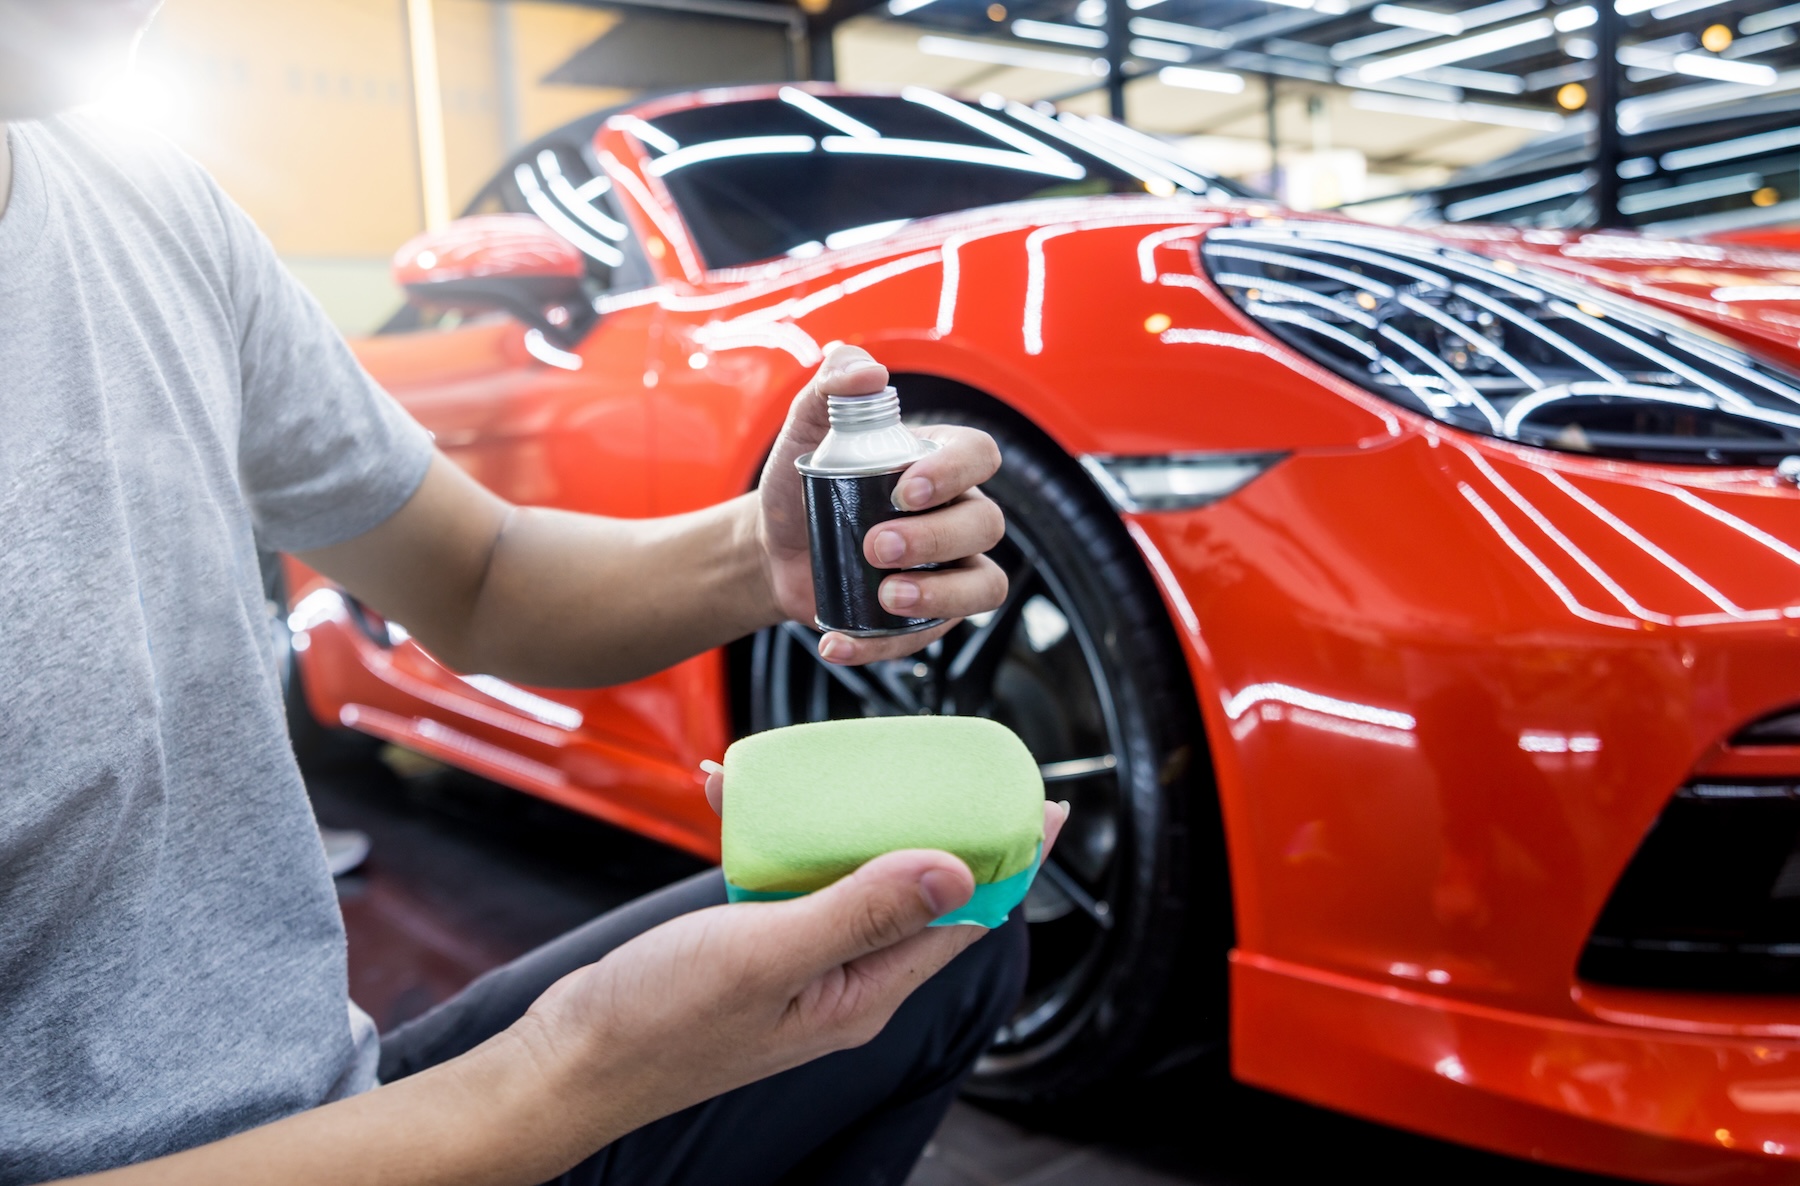 What Is Ceramic Coating And How Can It Help Your CarWhat Is